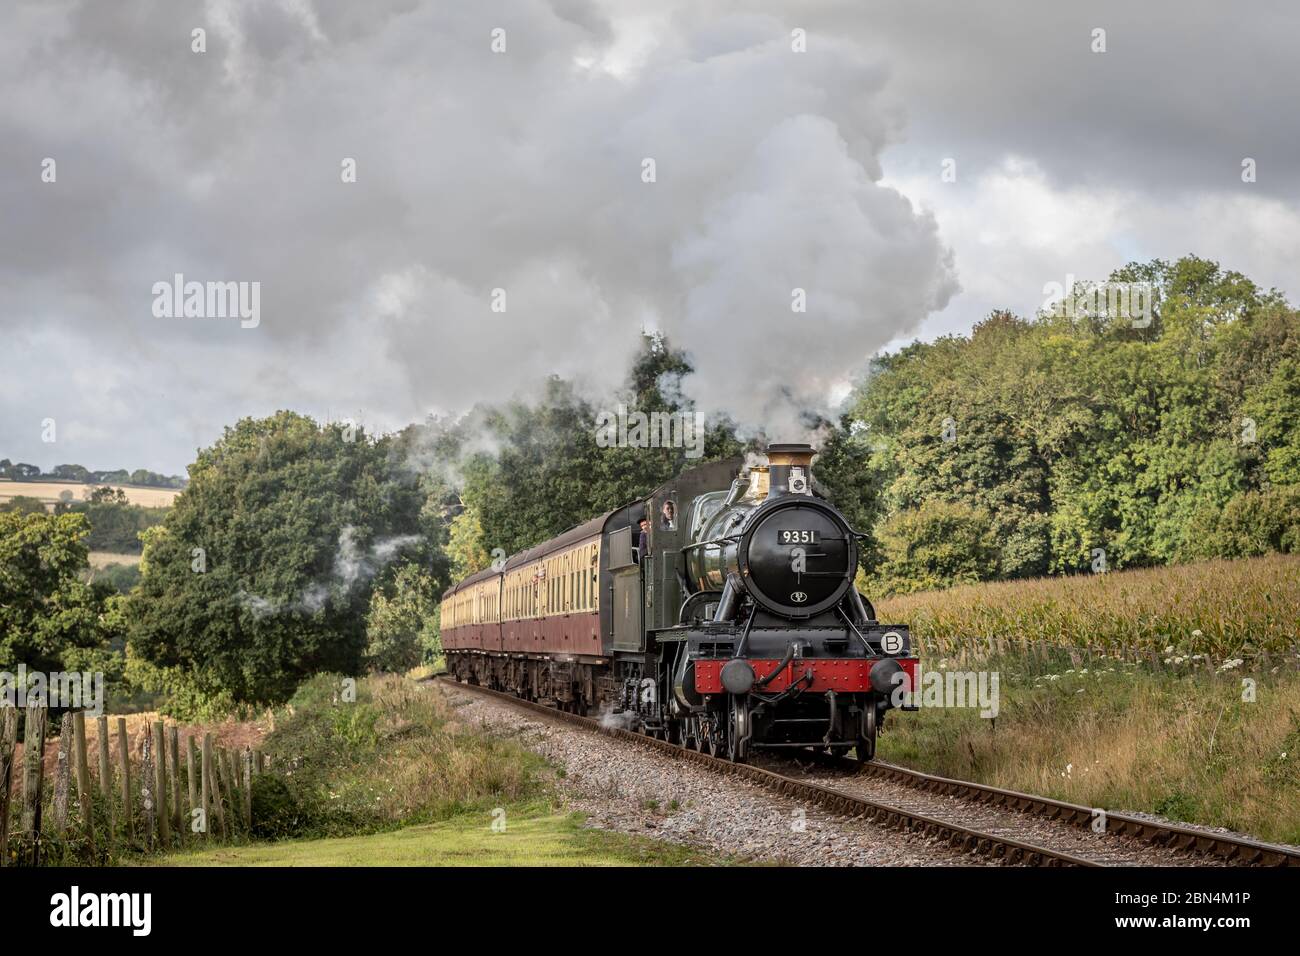 WSR '9351' 2-6-0 No. 9351 passes near Leigh Wood on the West Somerset Railway during their Autumn Steam Gala Stock Photo